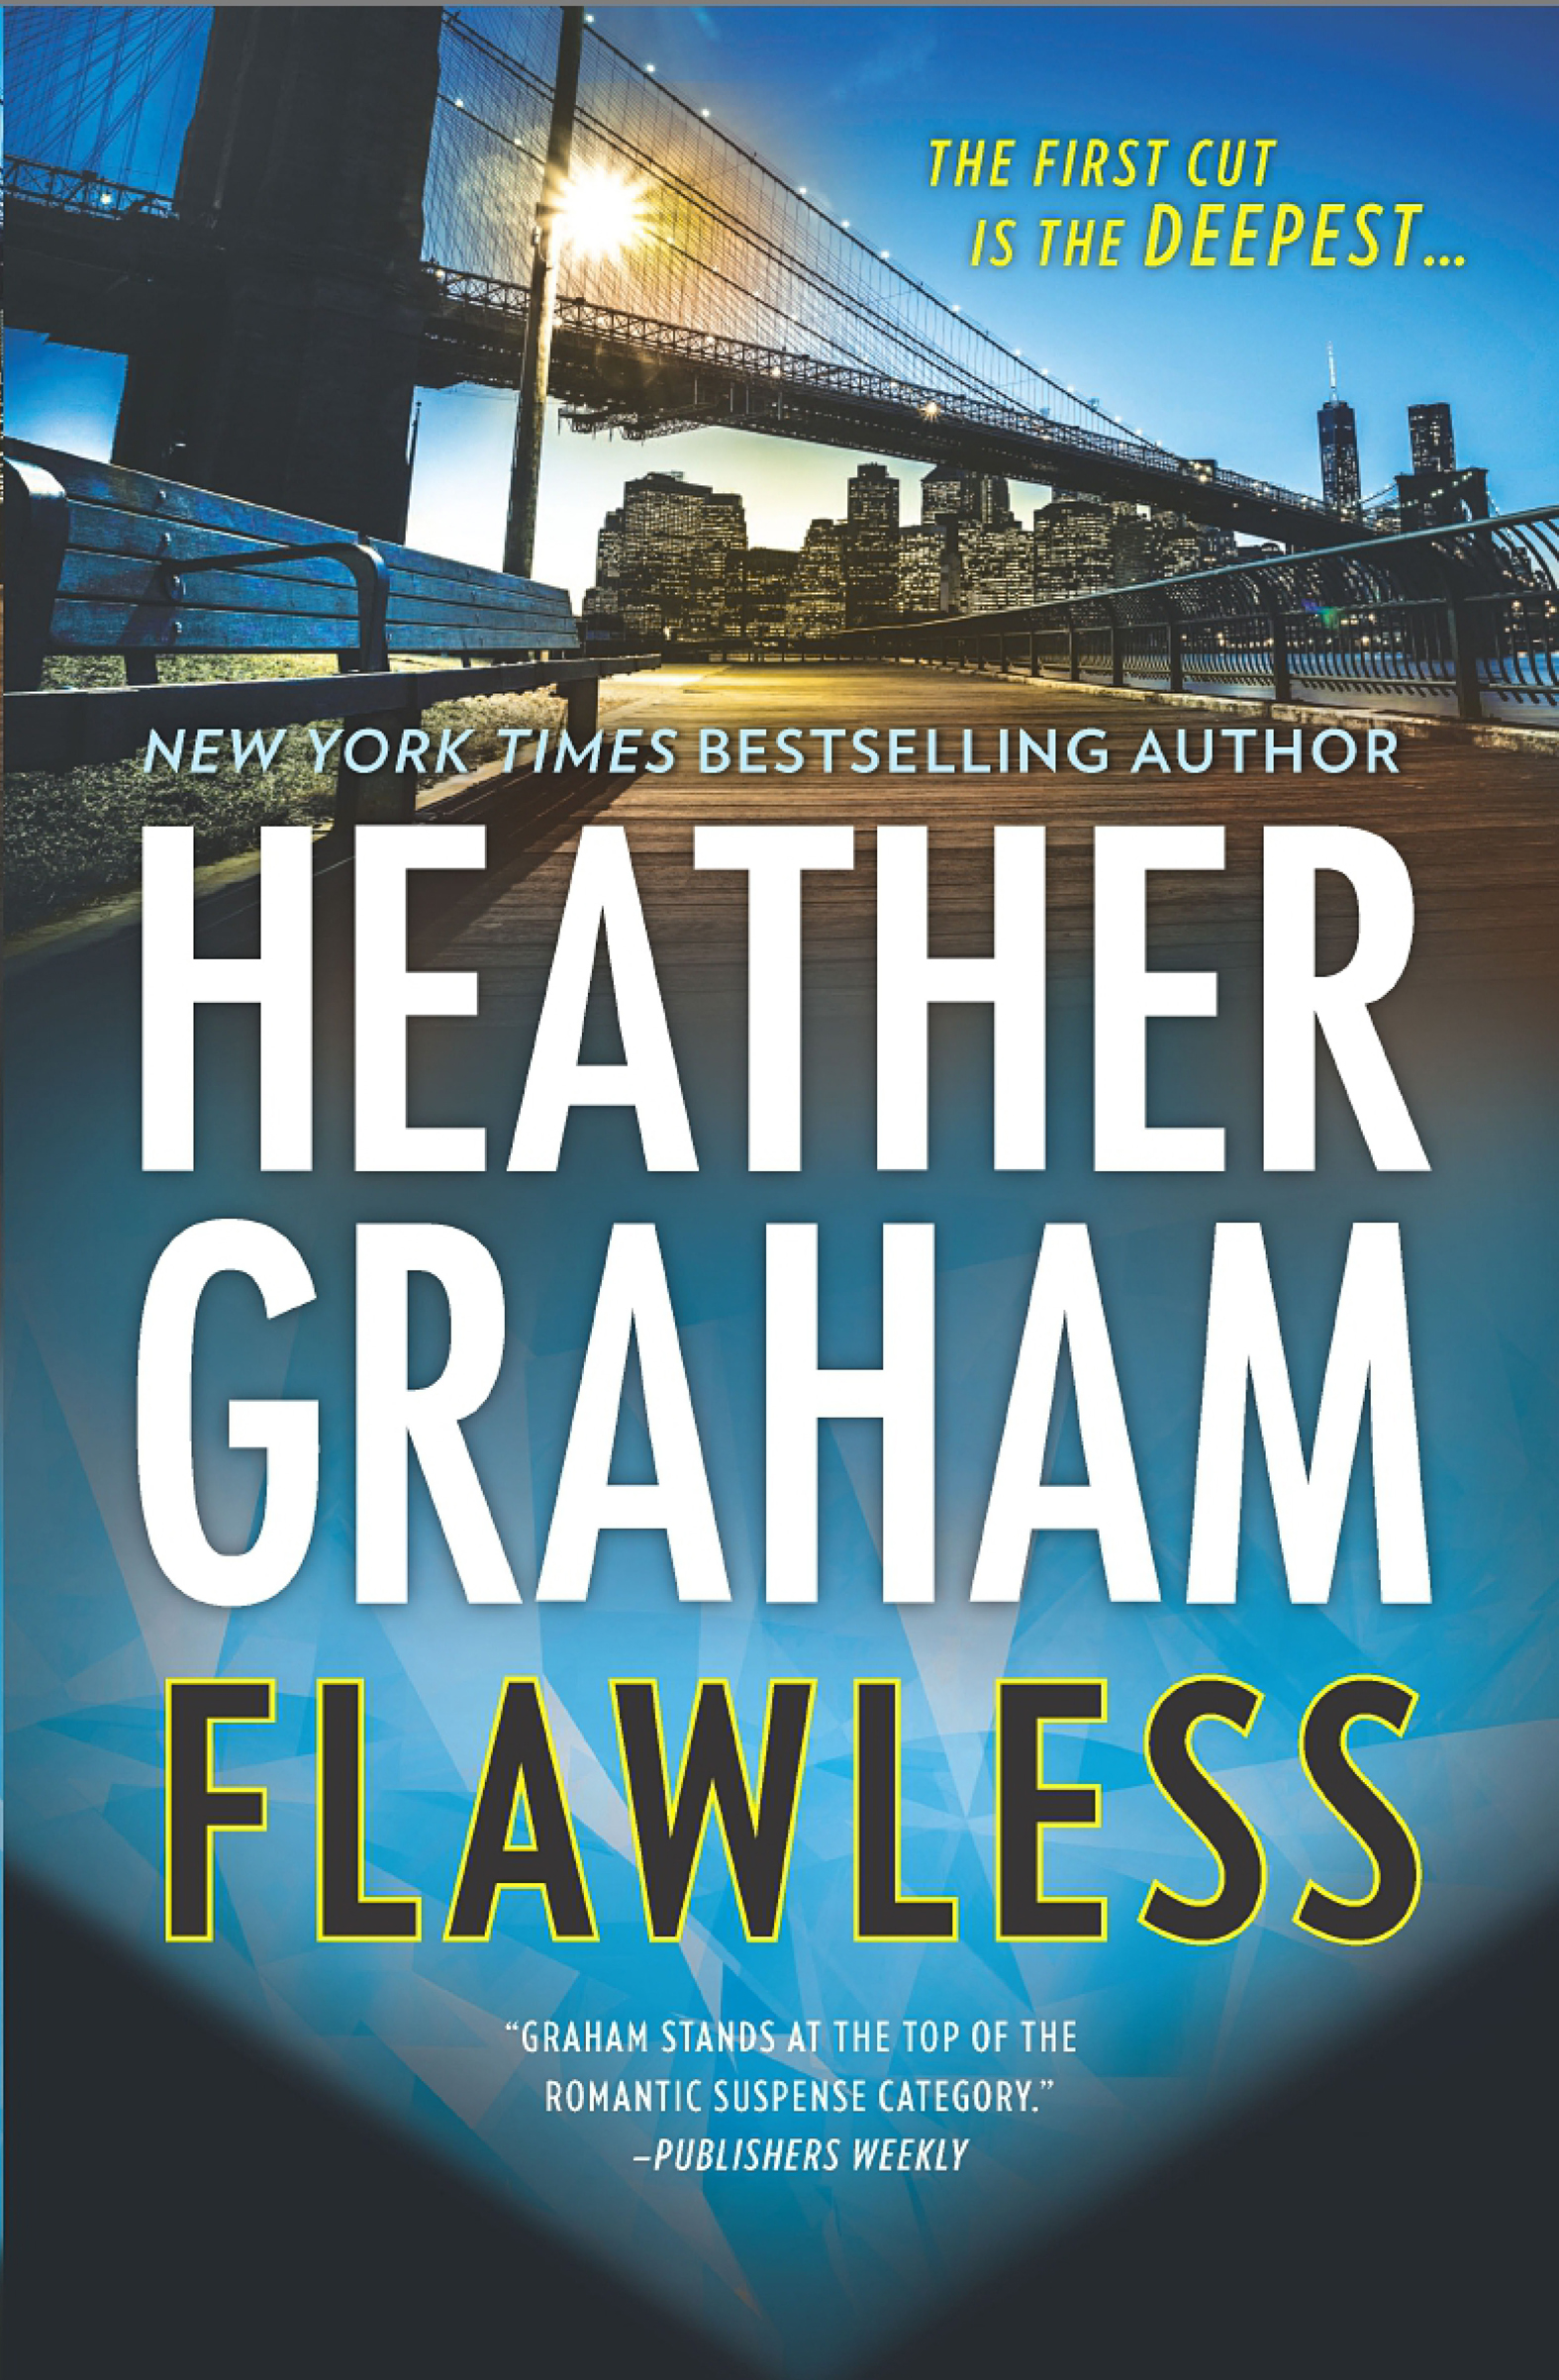 Flawless (2016) by Heather Graham